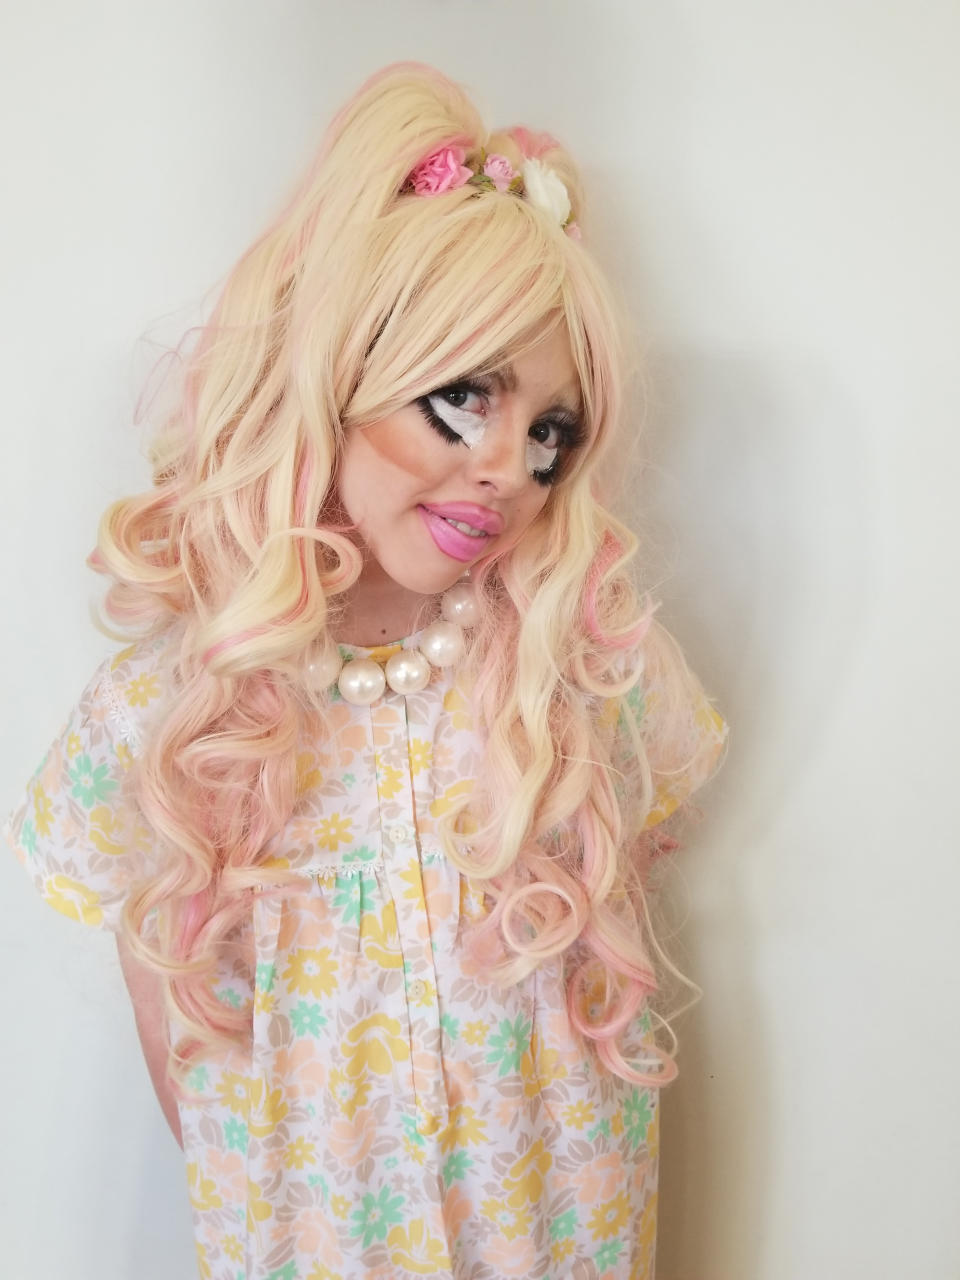 Eleven-year-old Bracken loves dressing in drag and has at least 10 outfits and multiple wigs. Source: Caters News